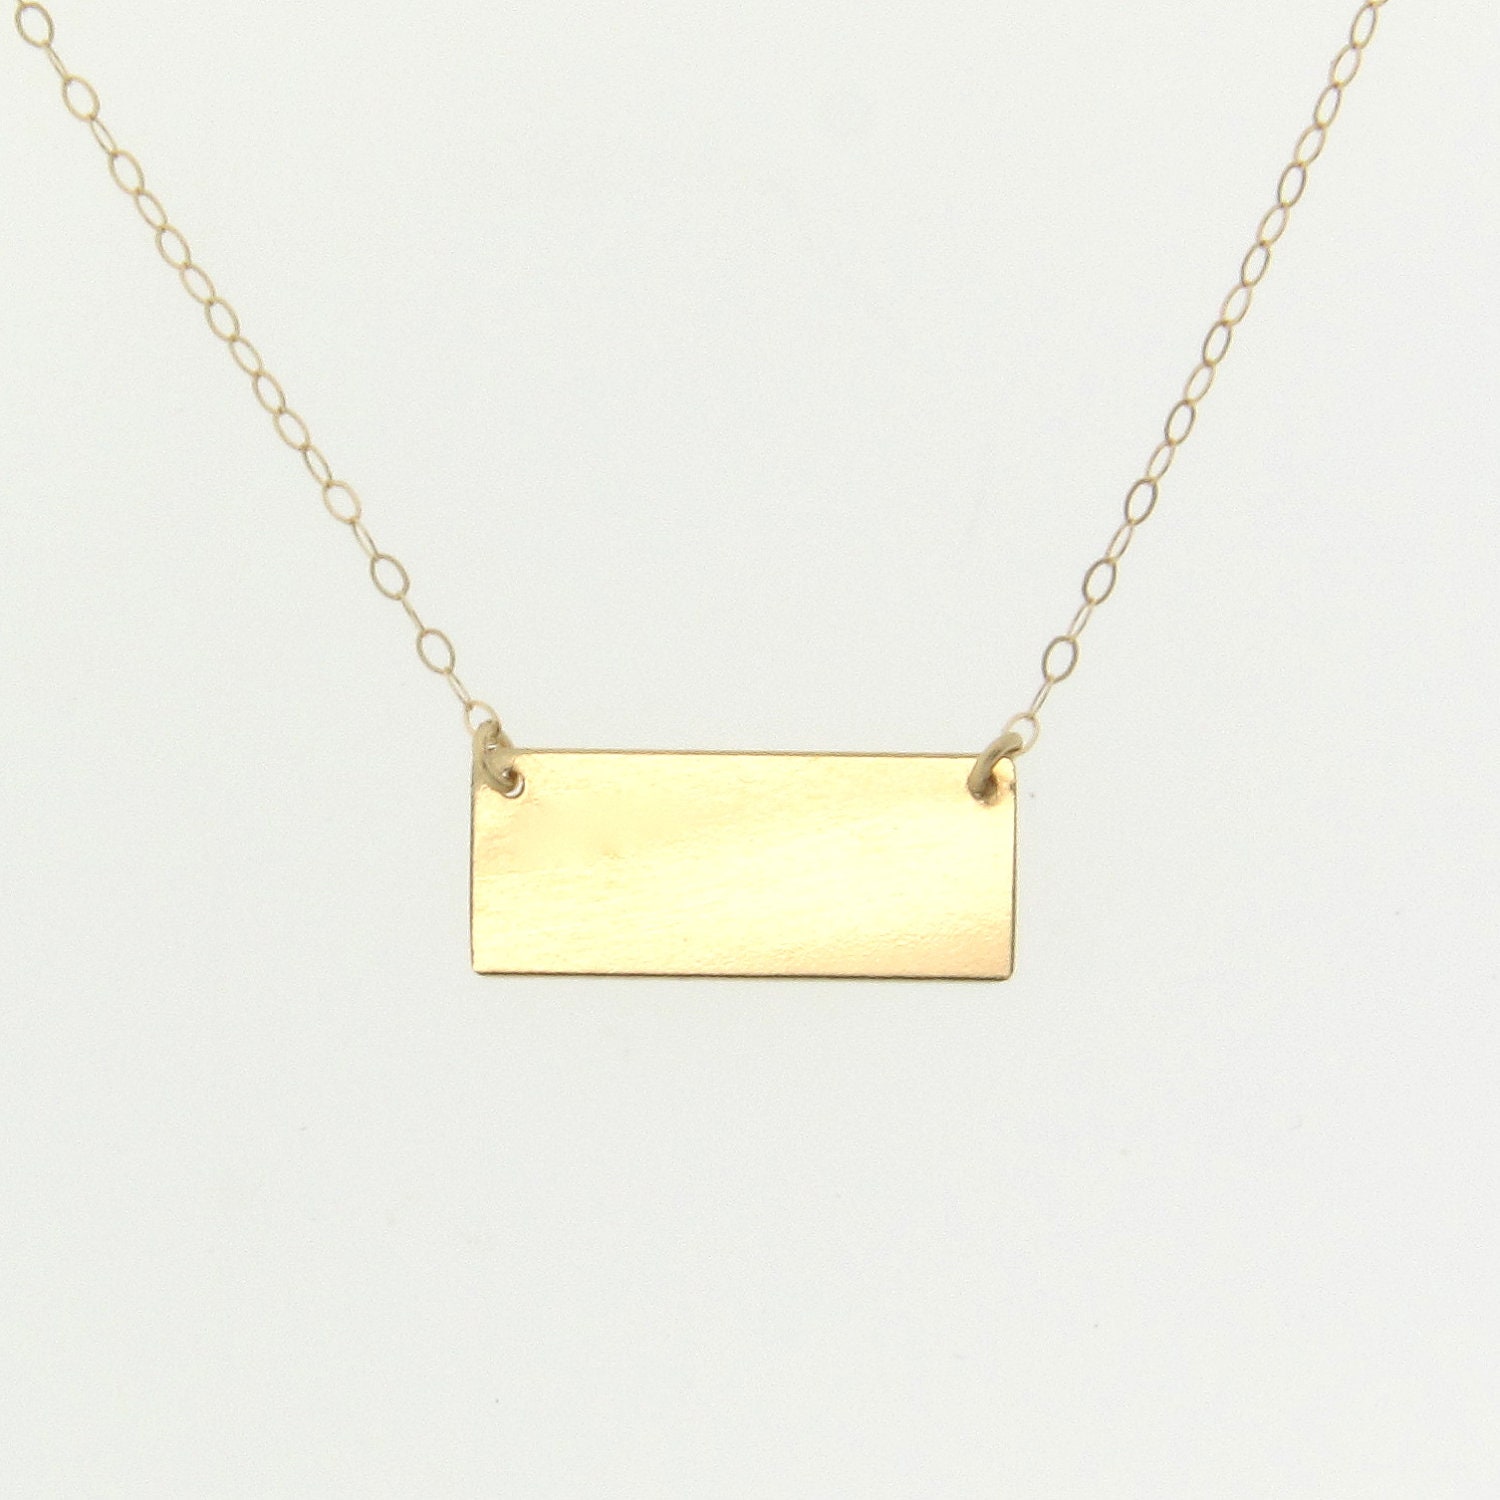 14K Gold Name Plate Necklace, Small Rectangle, Yellow or White Gold